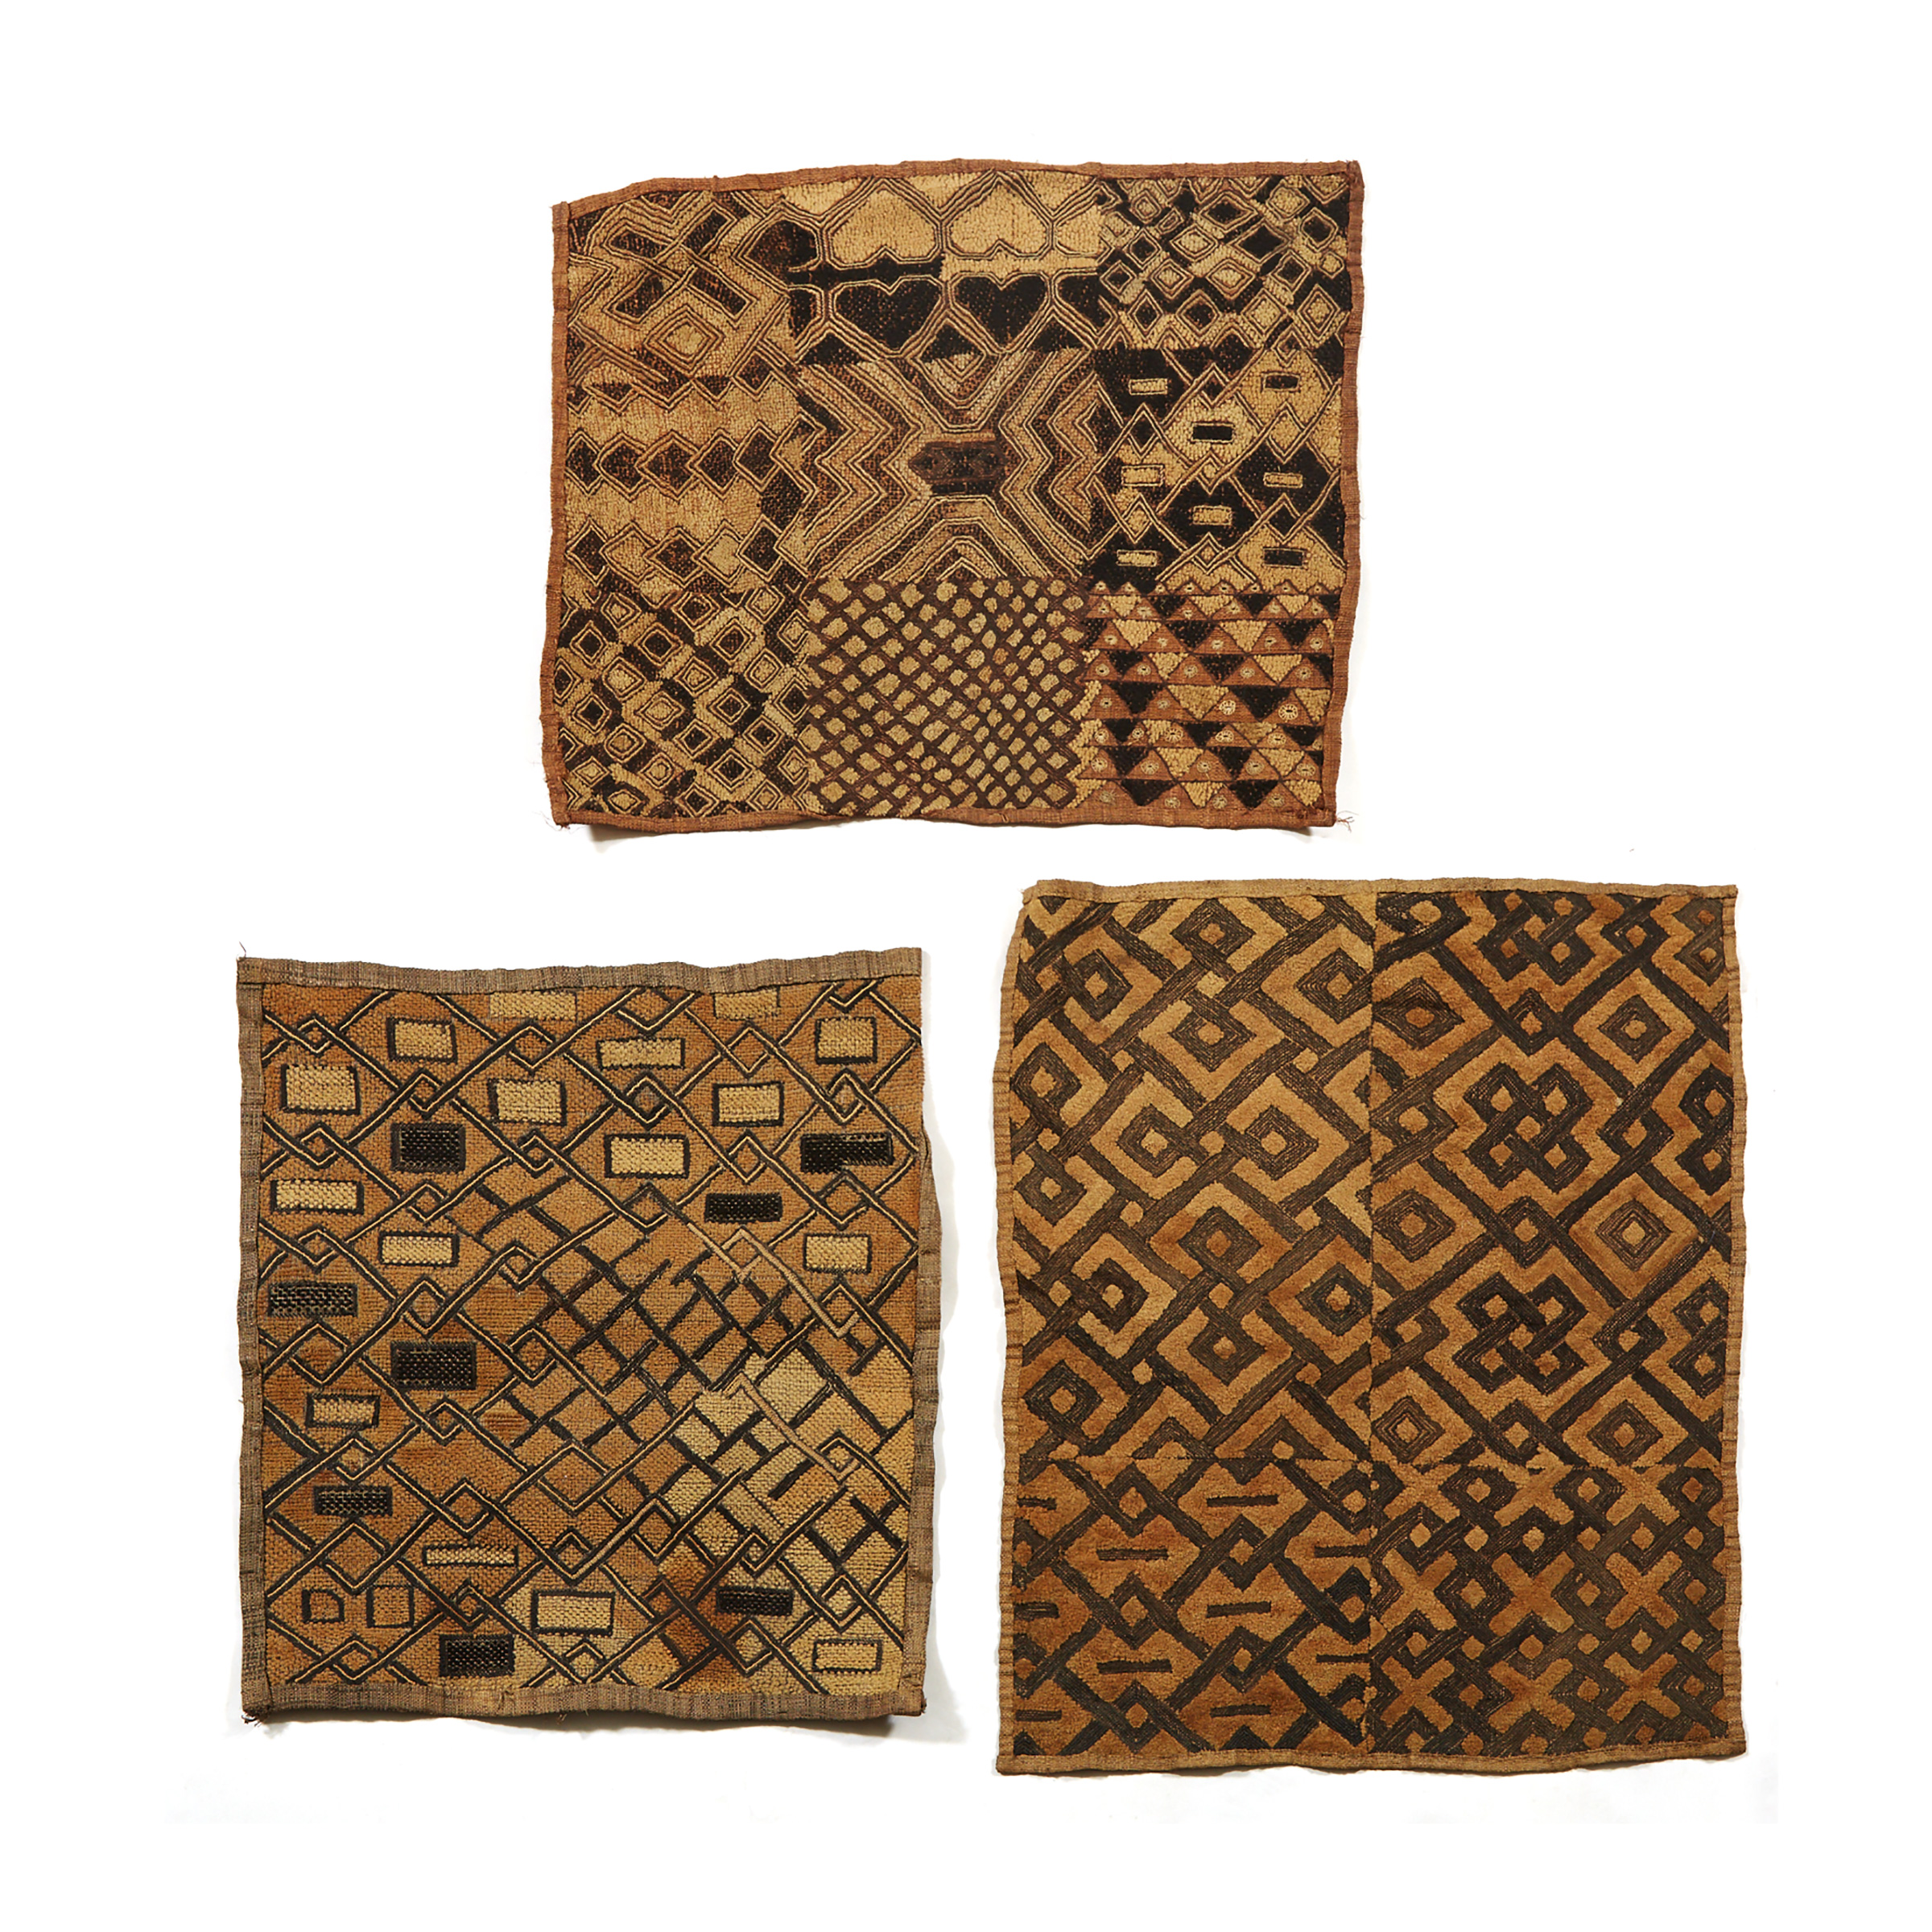 A Group of Three Kuba Woven Raffia Mats, Africa, early to mid 20th century